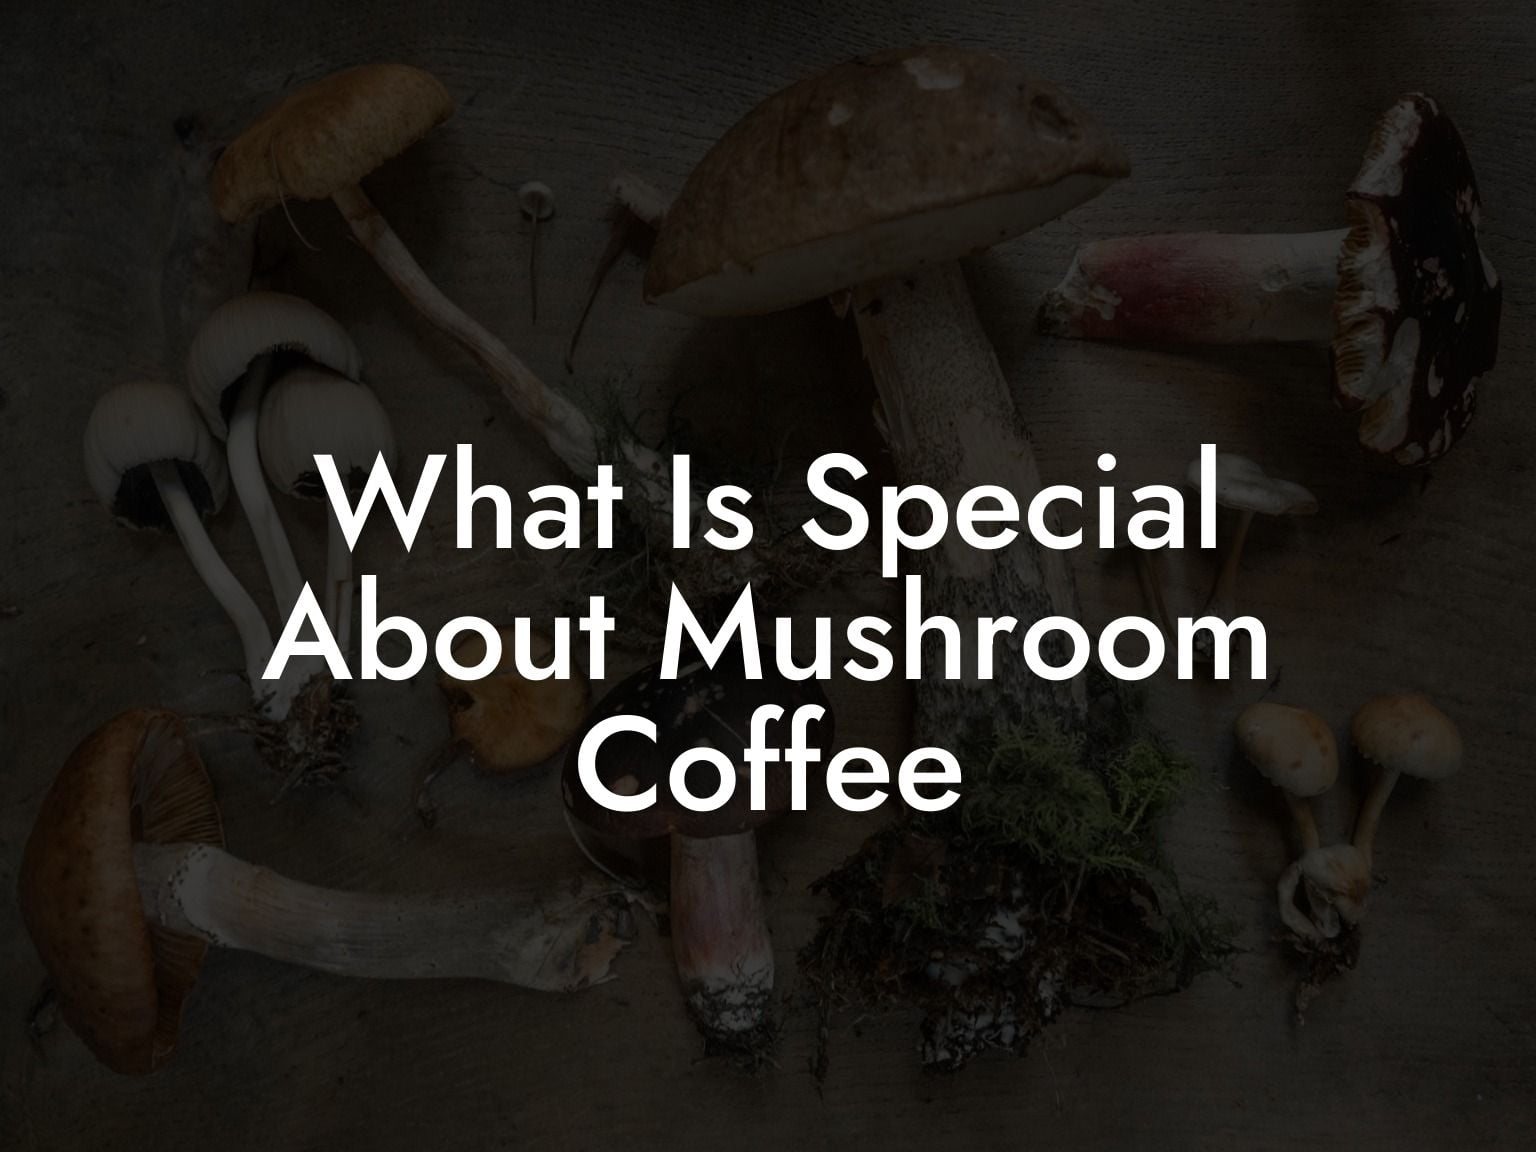 What Is Special About Mushroom Coffee